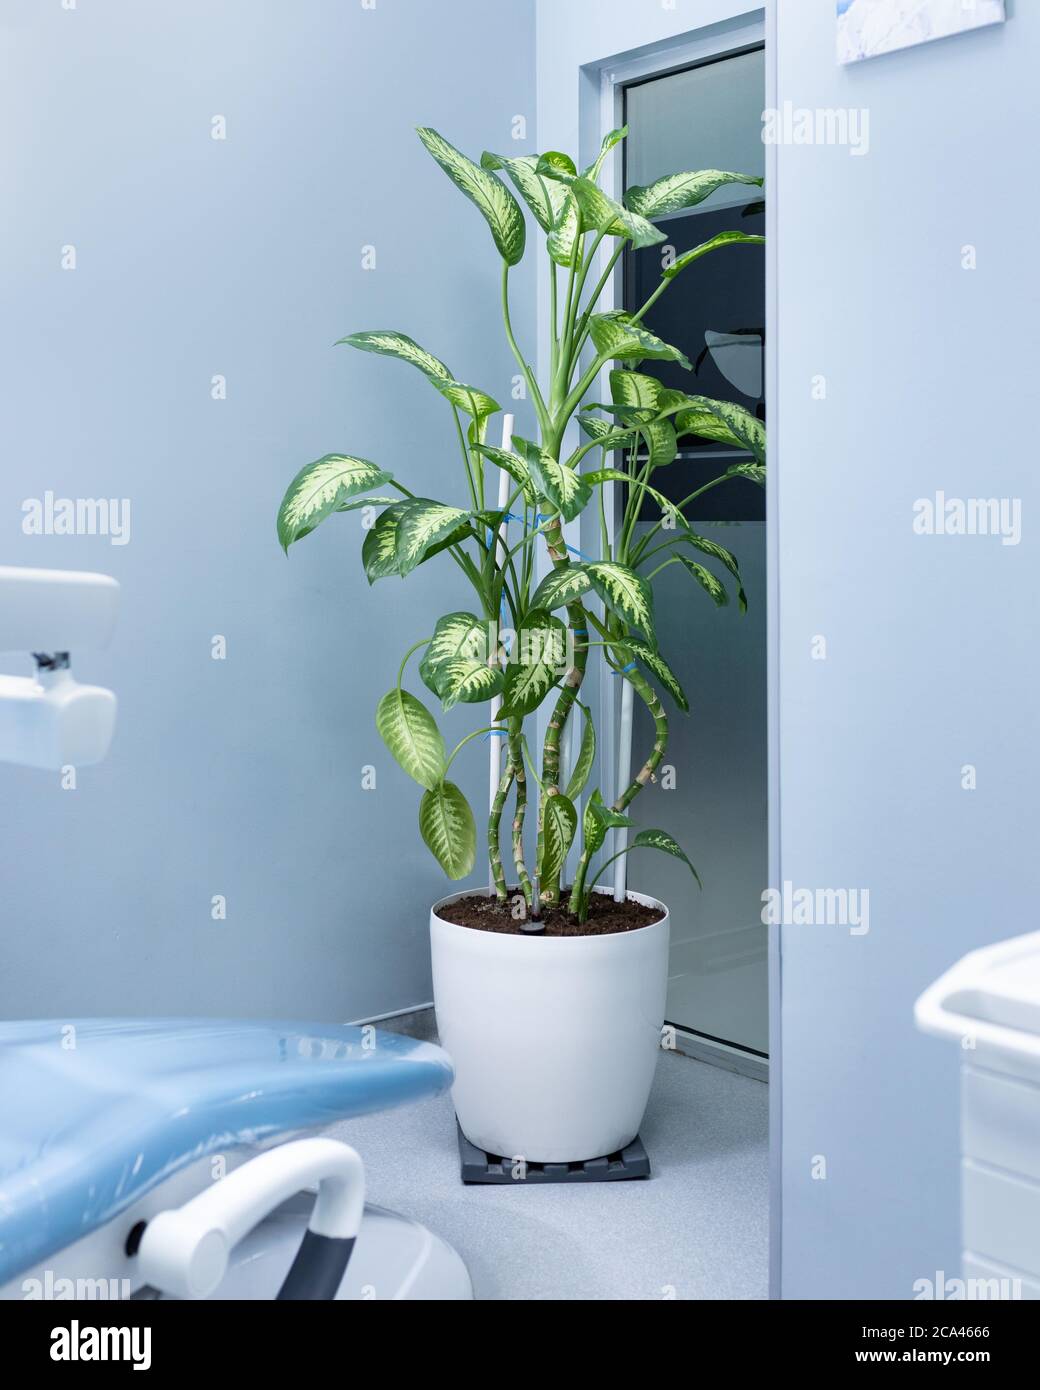 Dieffenbachia Dumb canes plant at office Stock Photo